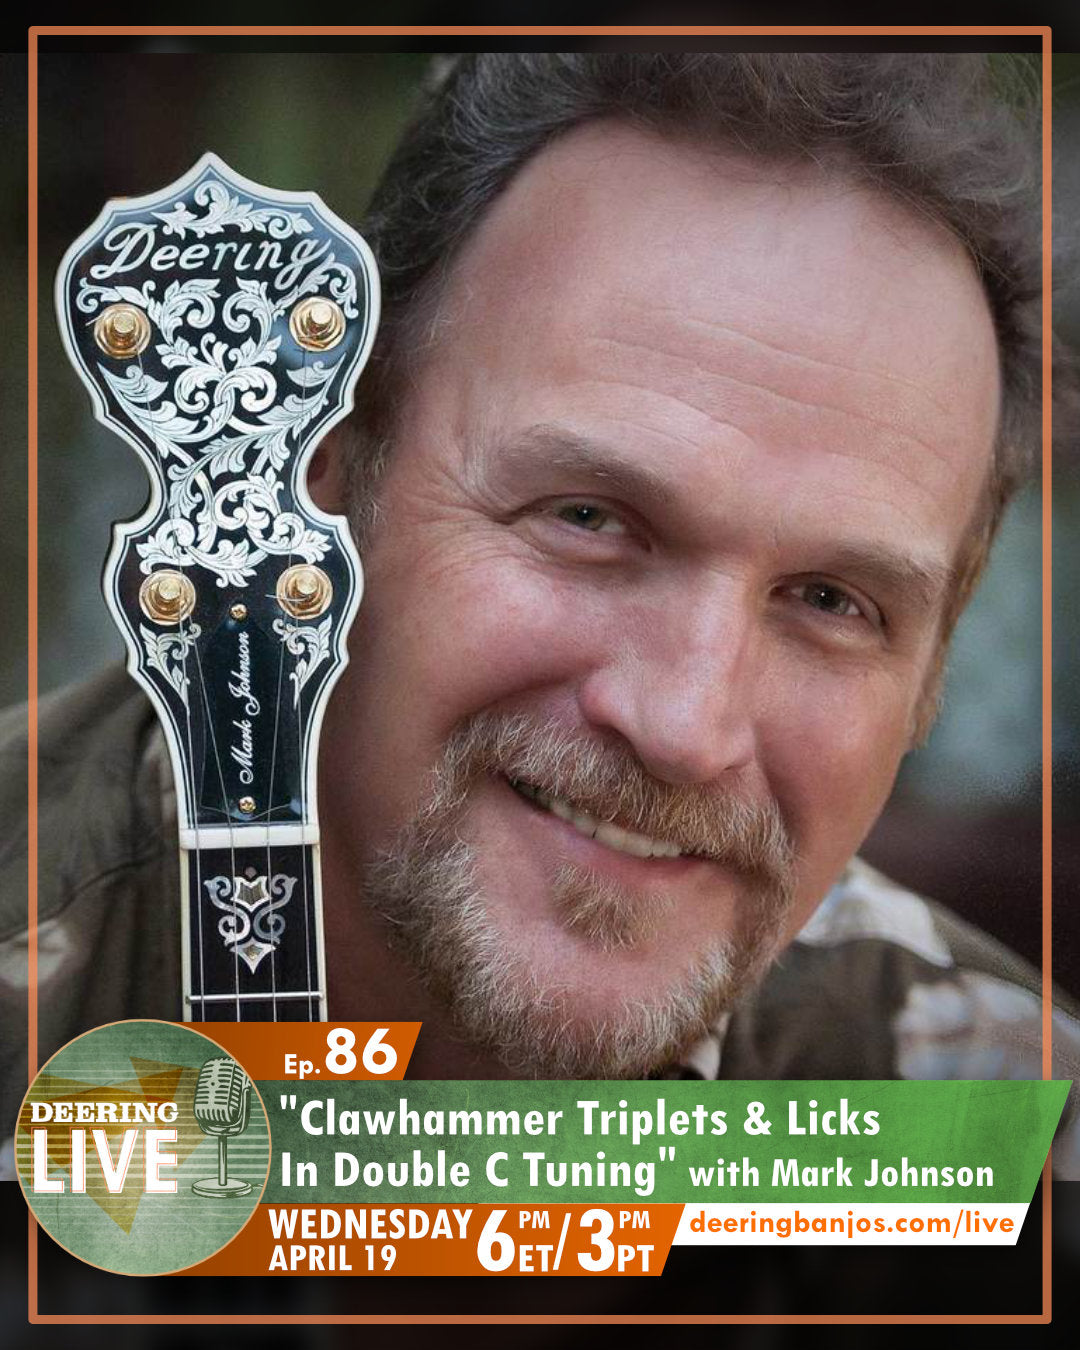 Clawhammer Triplets & Licks In Double Tunings With Mark Johnson On Deering Live